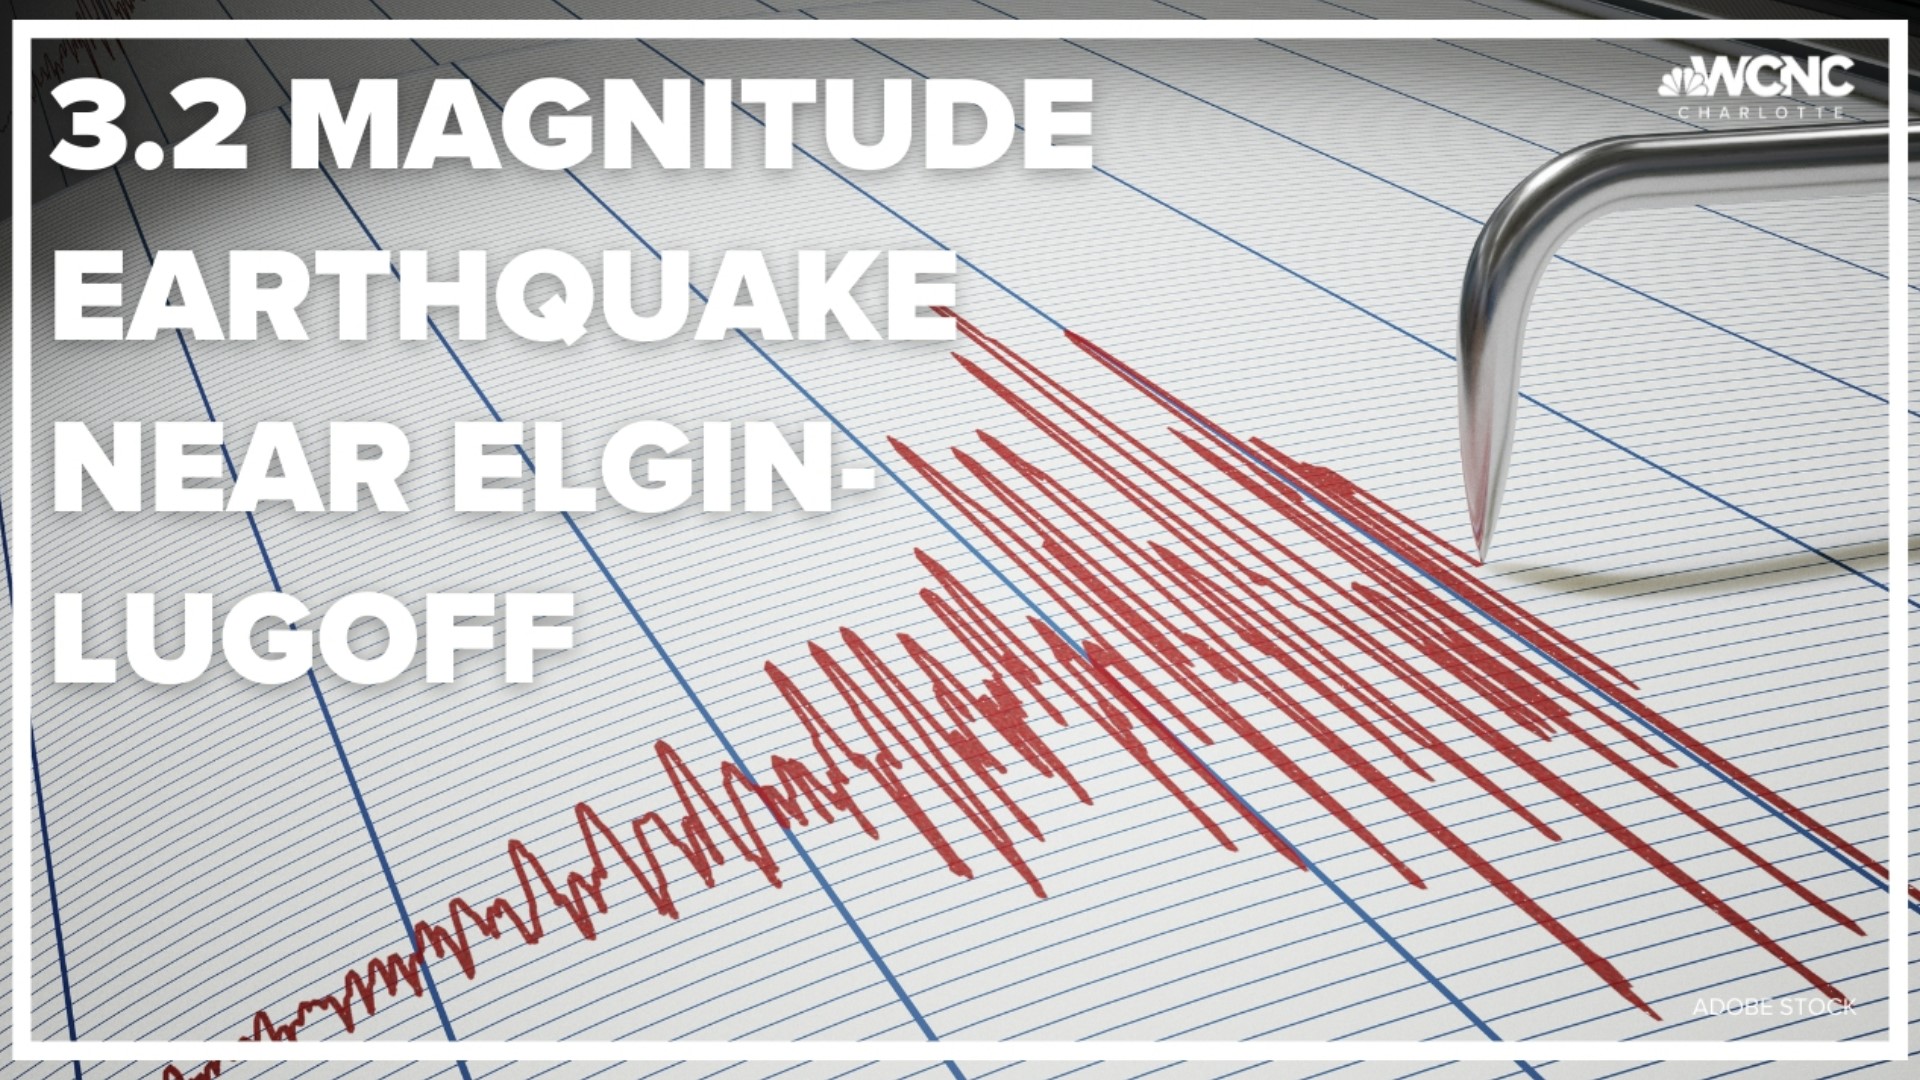 The US Geological Survey (USGS) recorded another earthquake near the Lugoff and Elgin area of Kershaw County Monday morning.